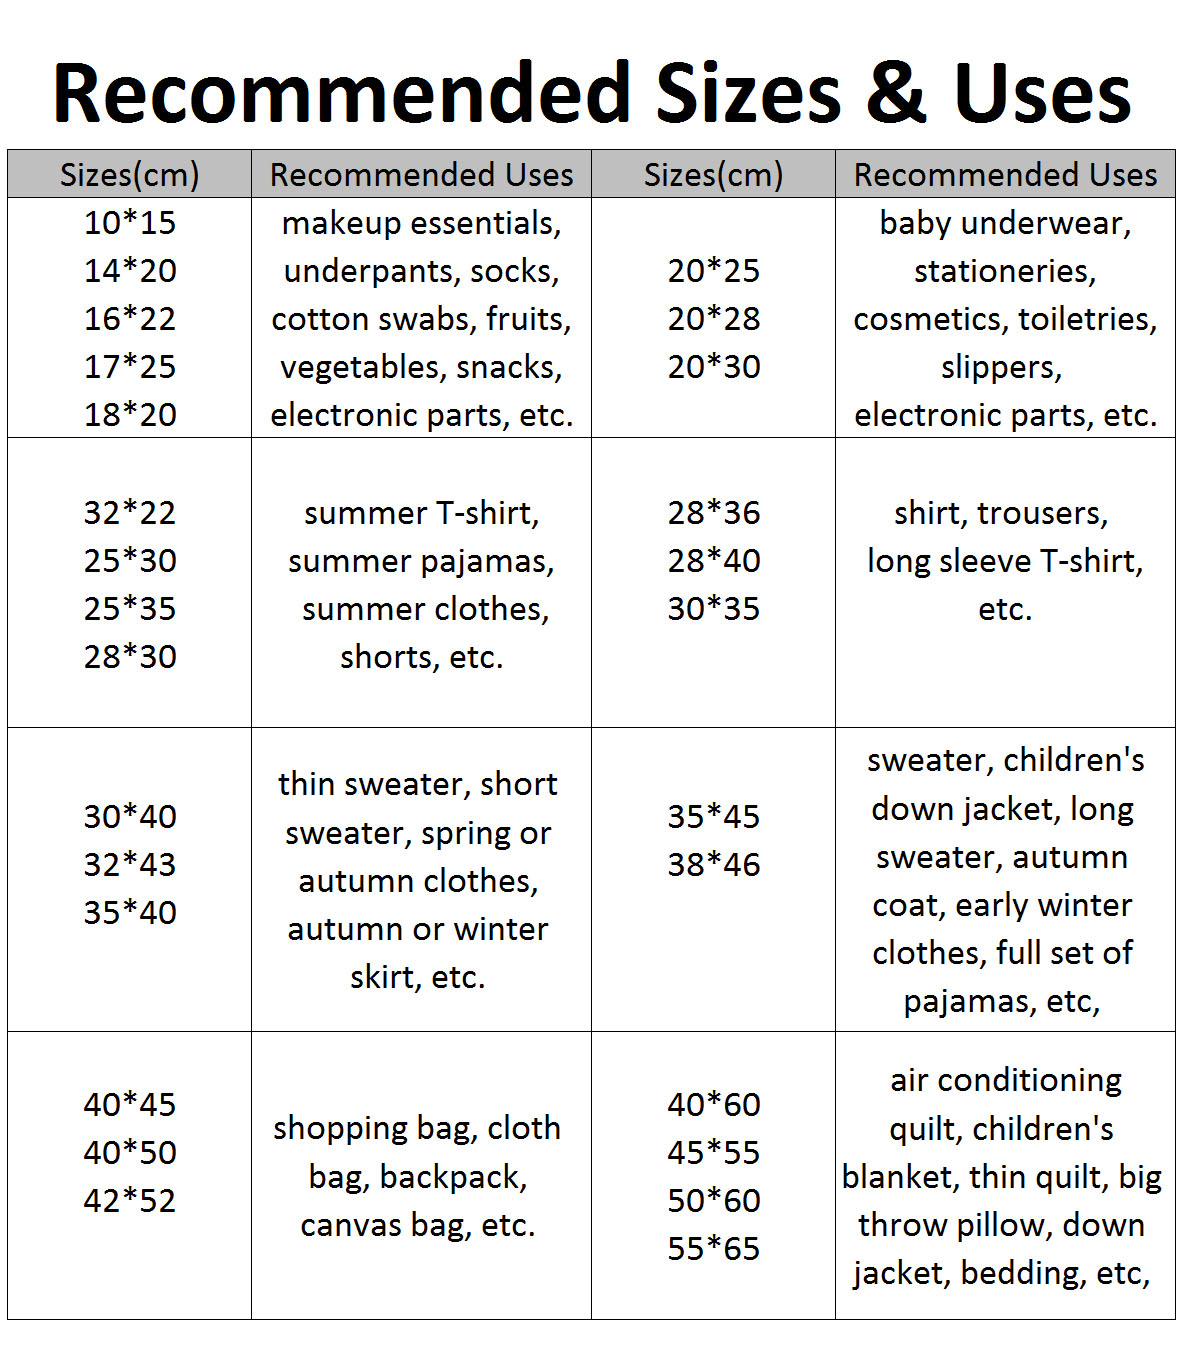 Recommended sizes and uses for slider zipper bags